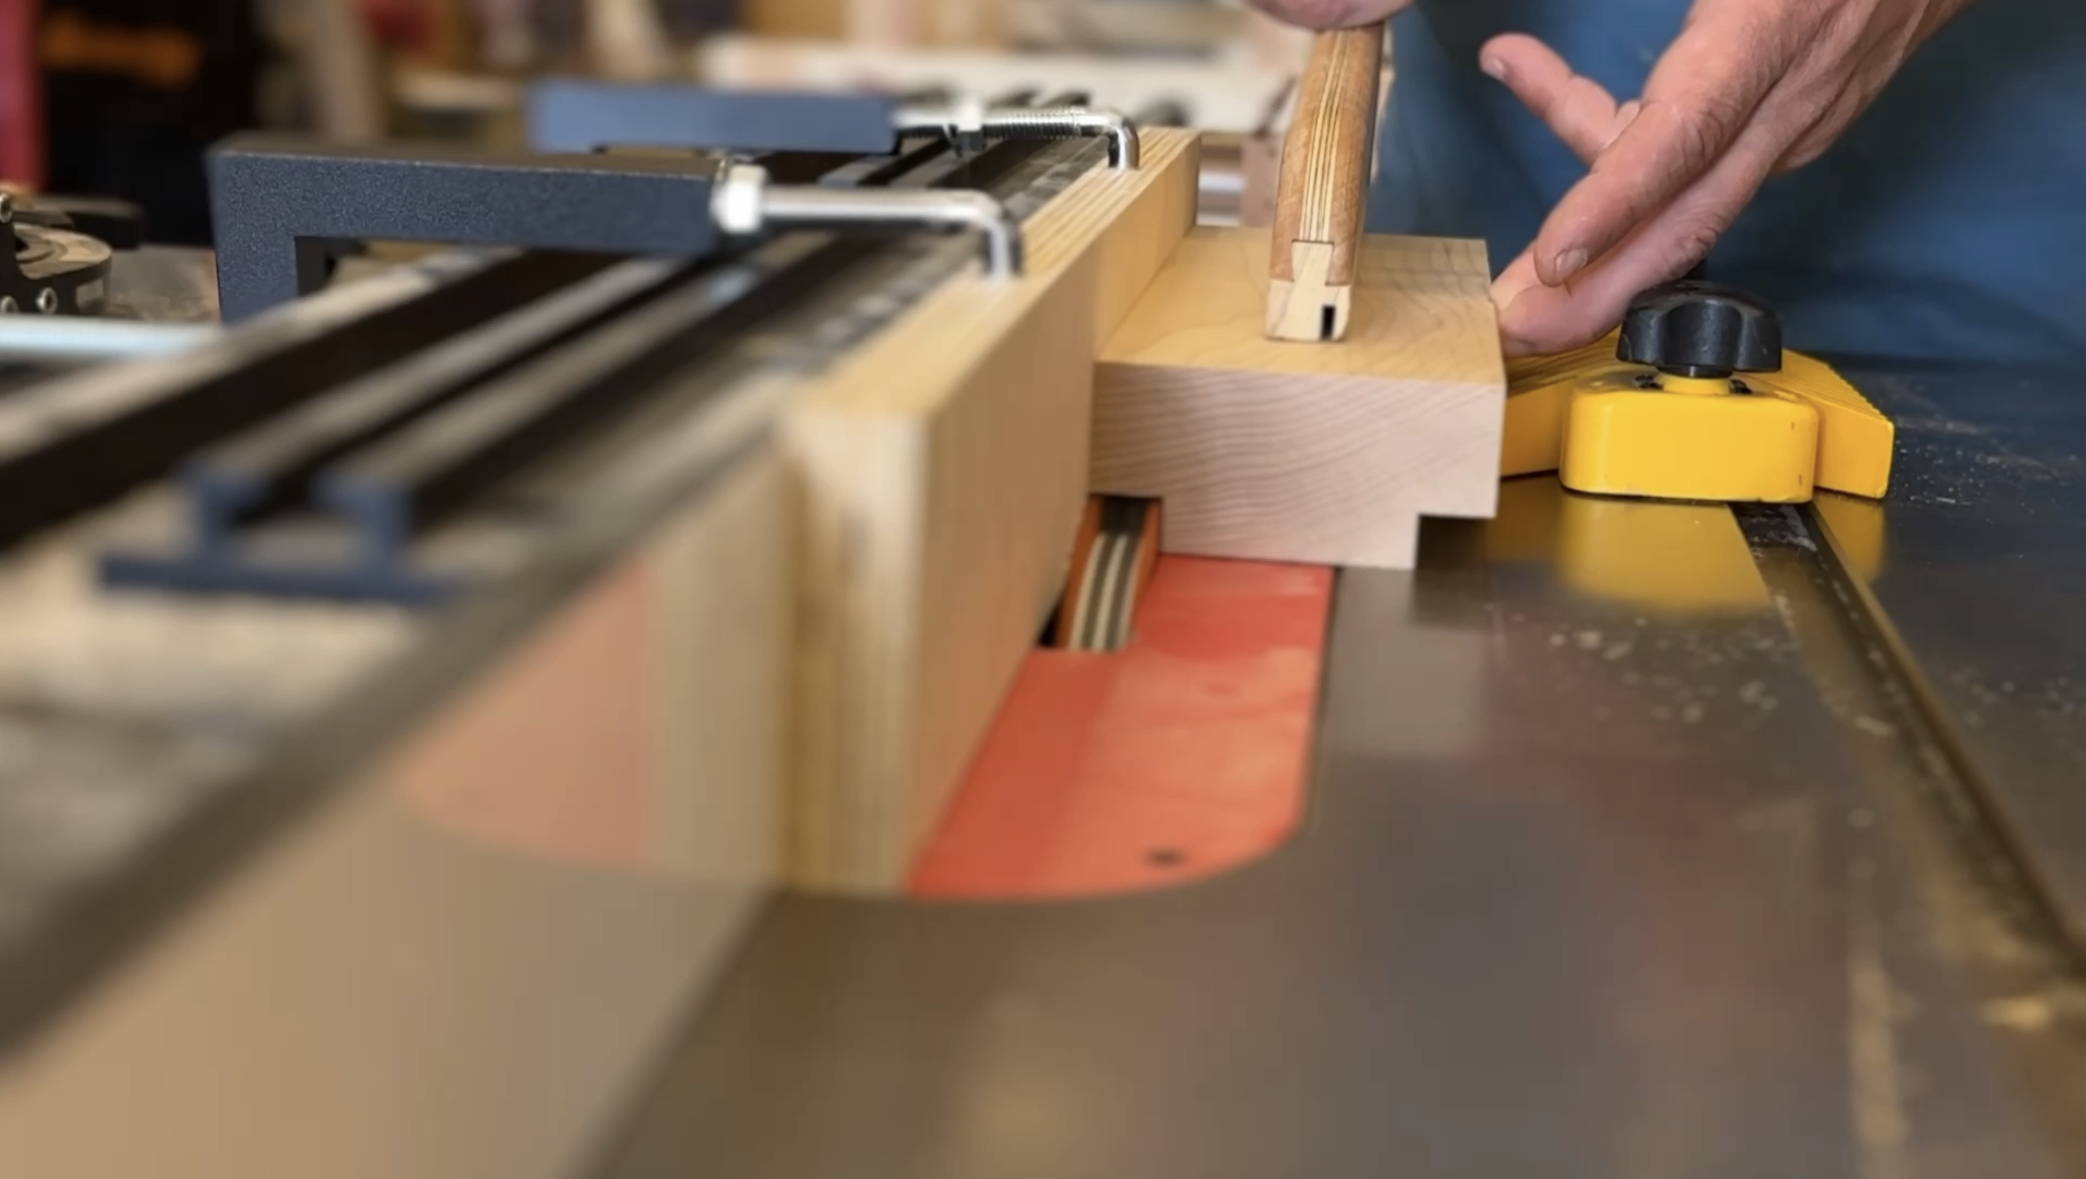 4 Ways to Use Adjustable Fence Clamps for Super Useful Shop Hacks (Quick Tip)